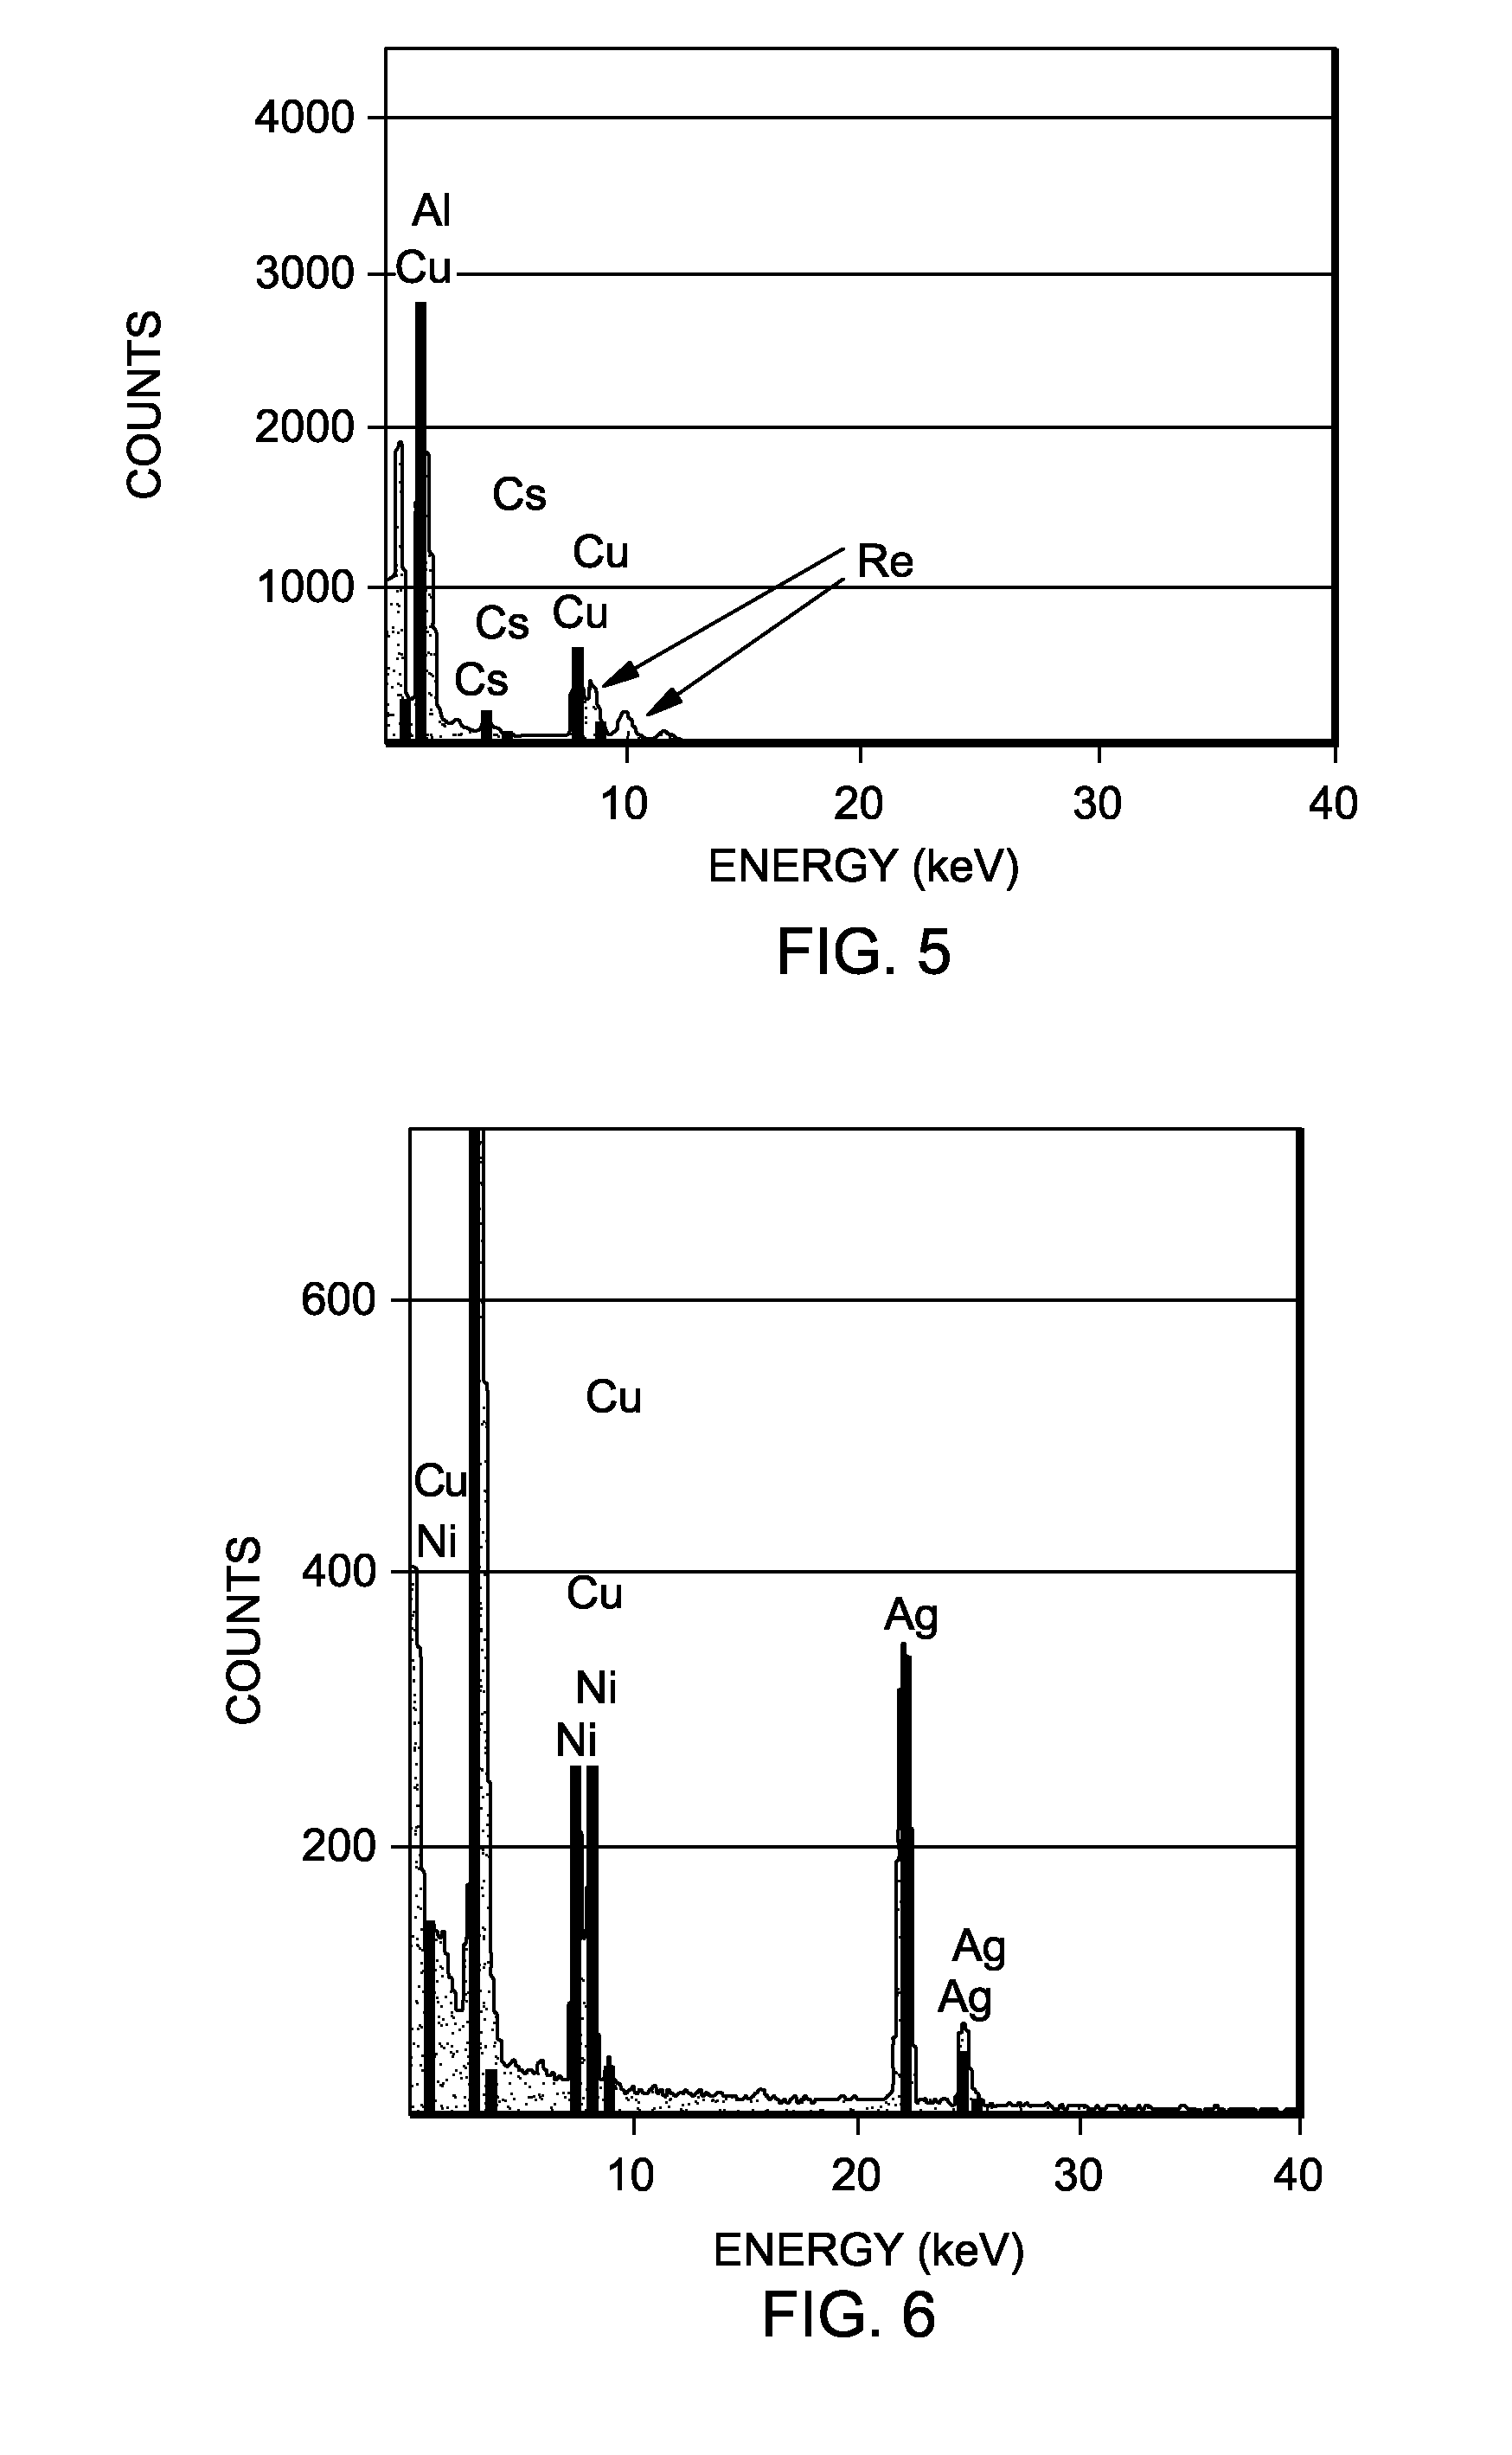 Epoxidation process and microstructure